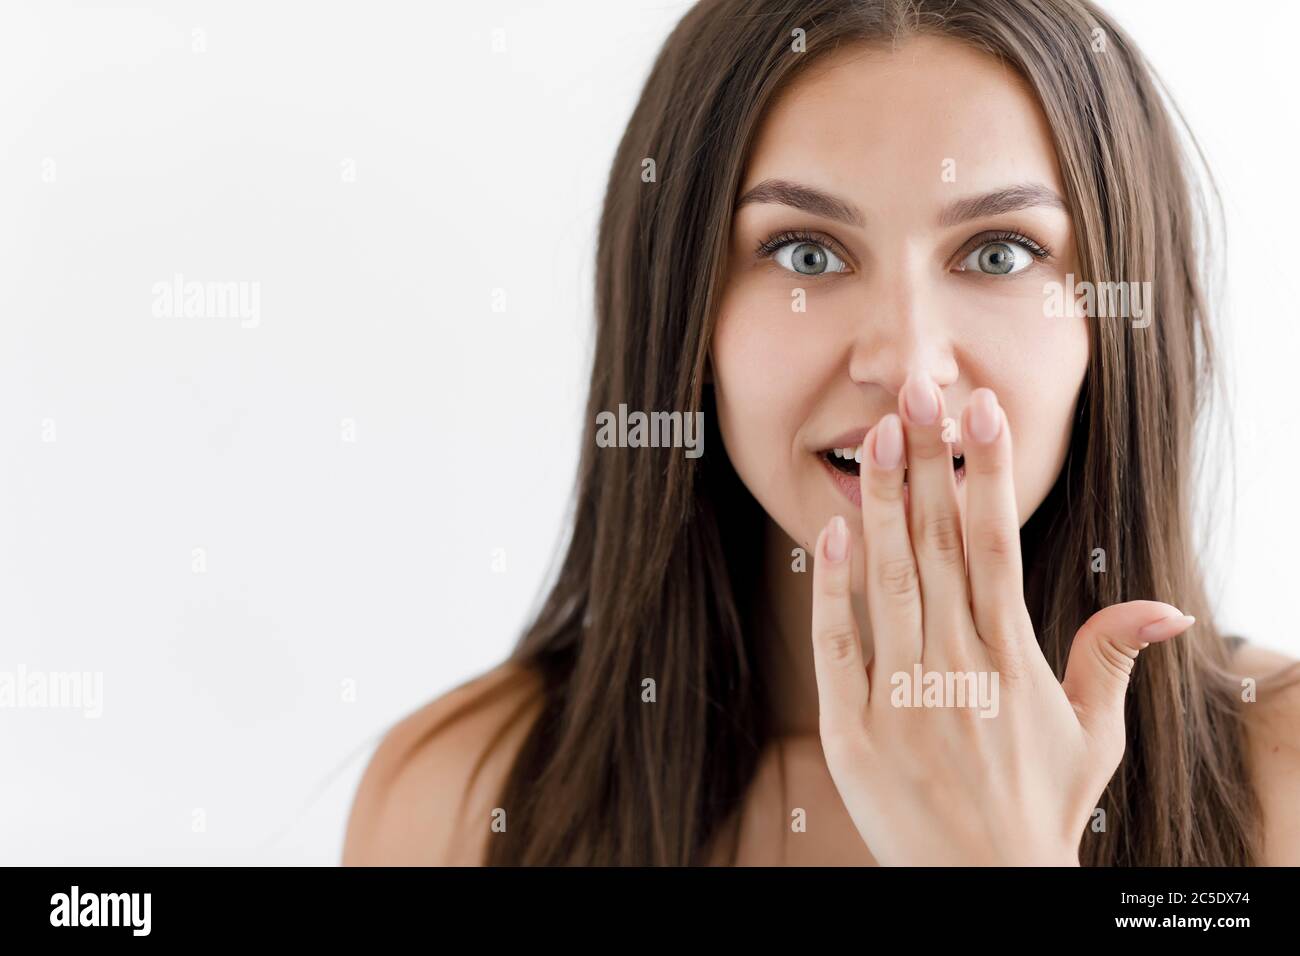 Surprised young woman portrait, beautiful emotional girl Stock Photo